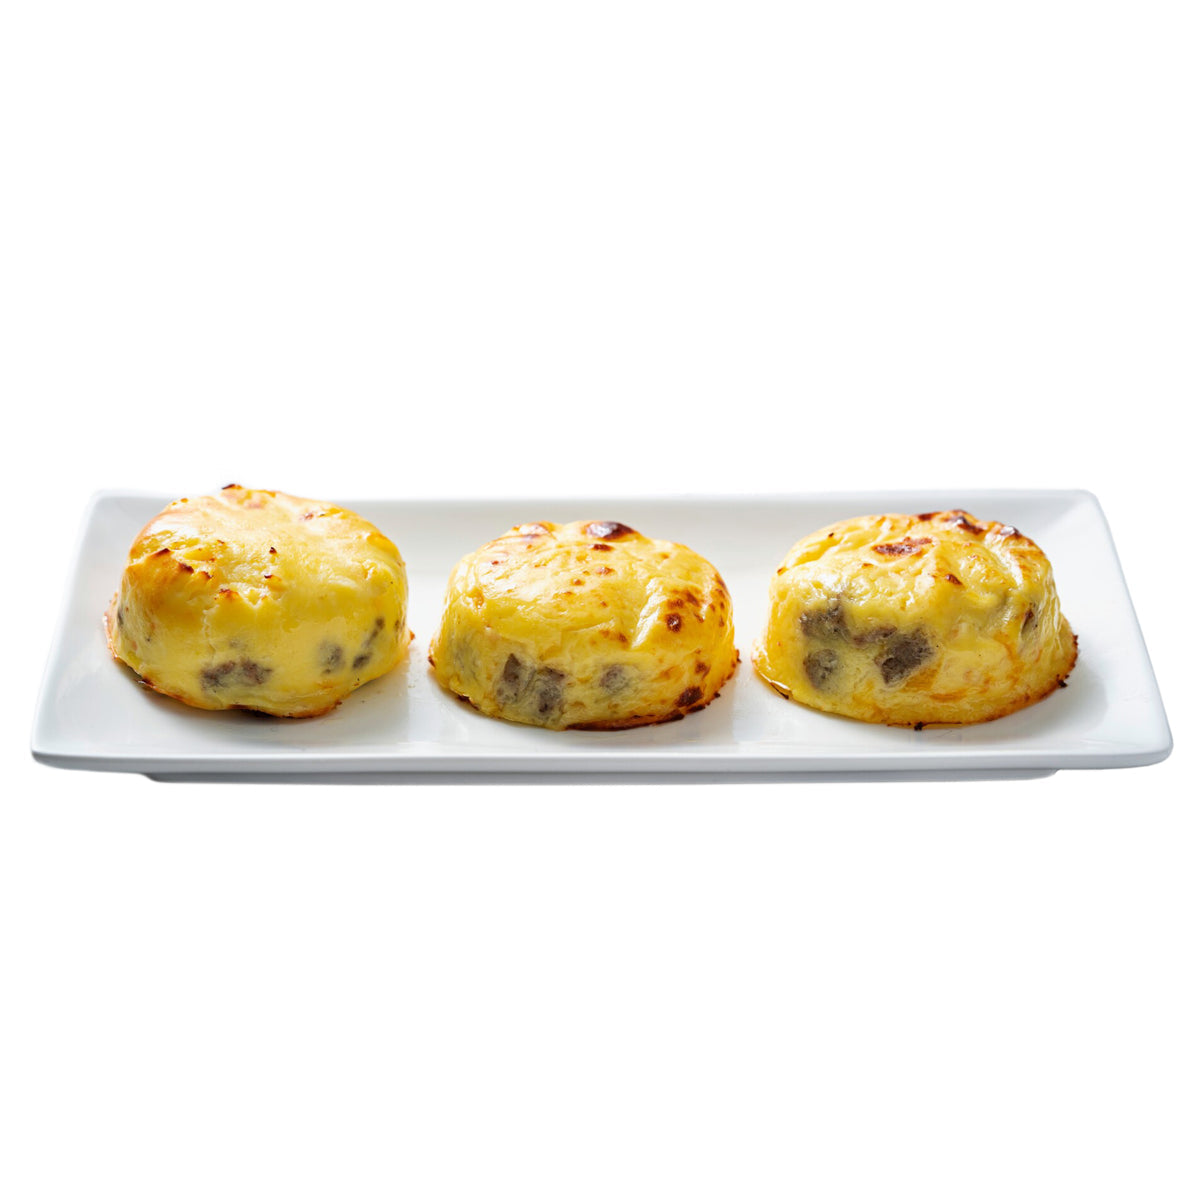 Cuisine Solutions Turkey Sausage and Cheese Sous Vide Egg Bites 2 CT